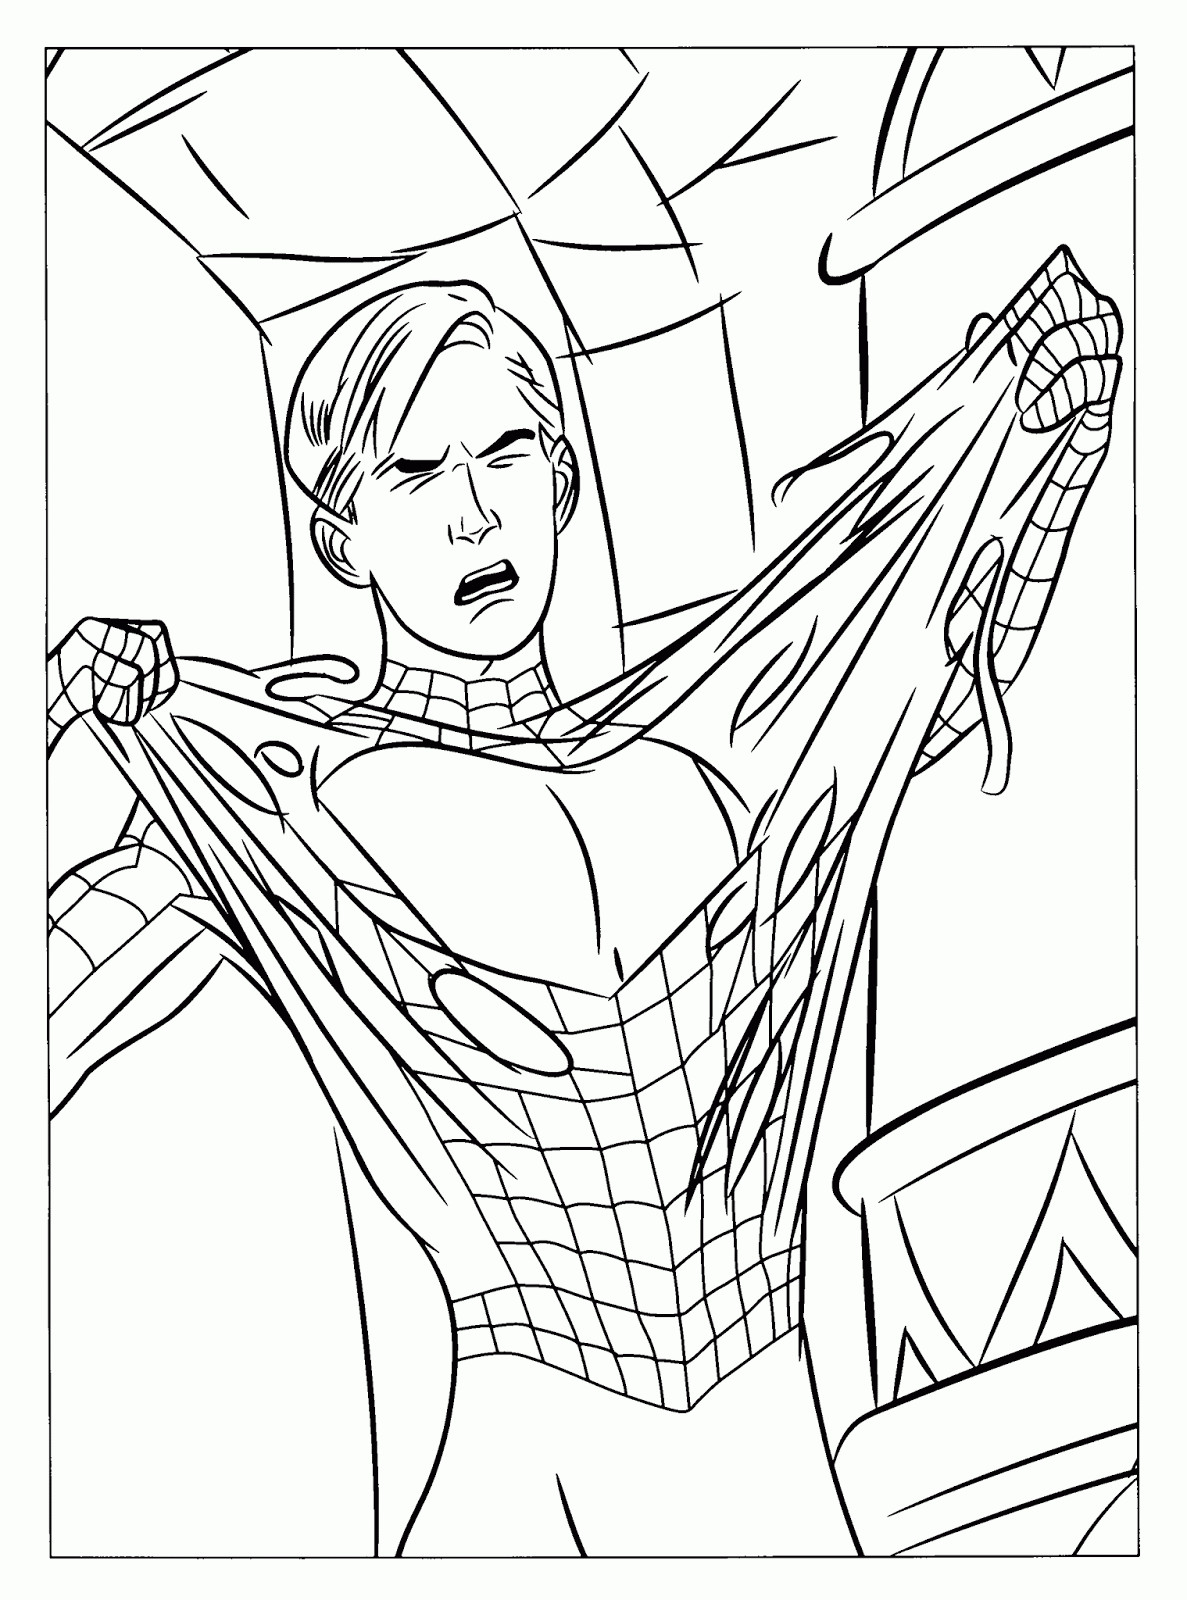 Coloring Pages For Kids Spiderman
 Coloring Pages Spiderman Free Printable Coloring Pages